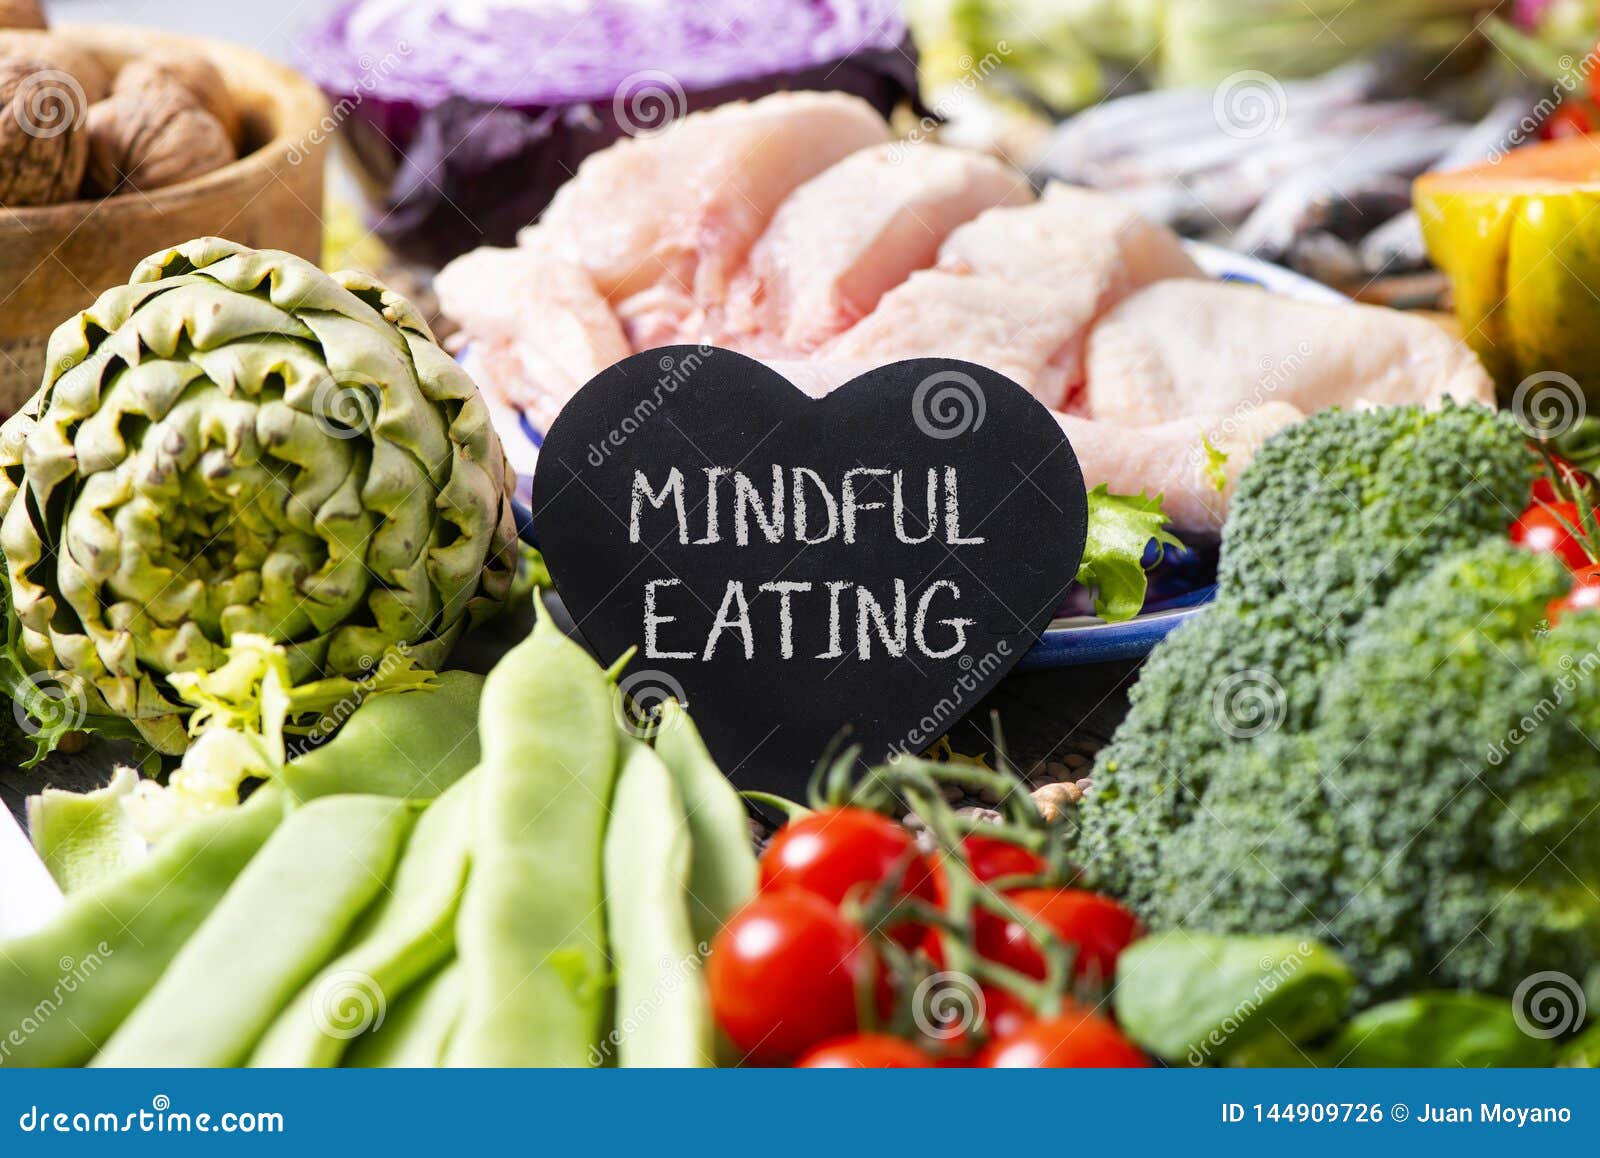 vegetables, chicken and text mindful eating